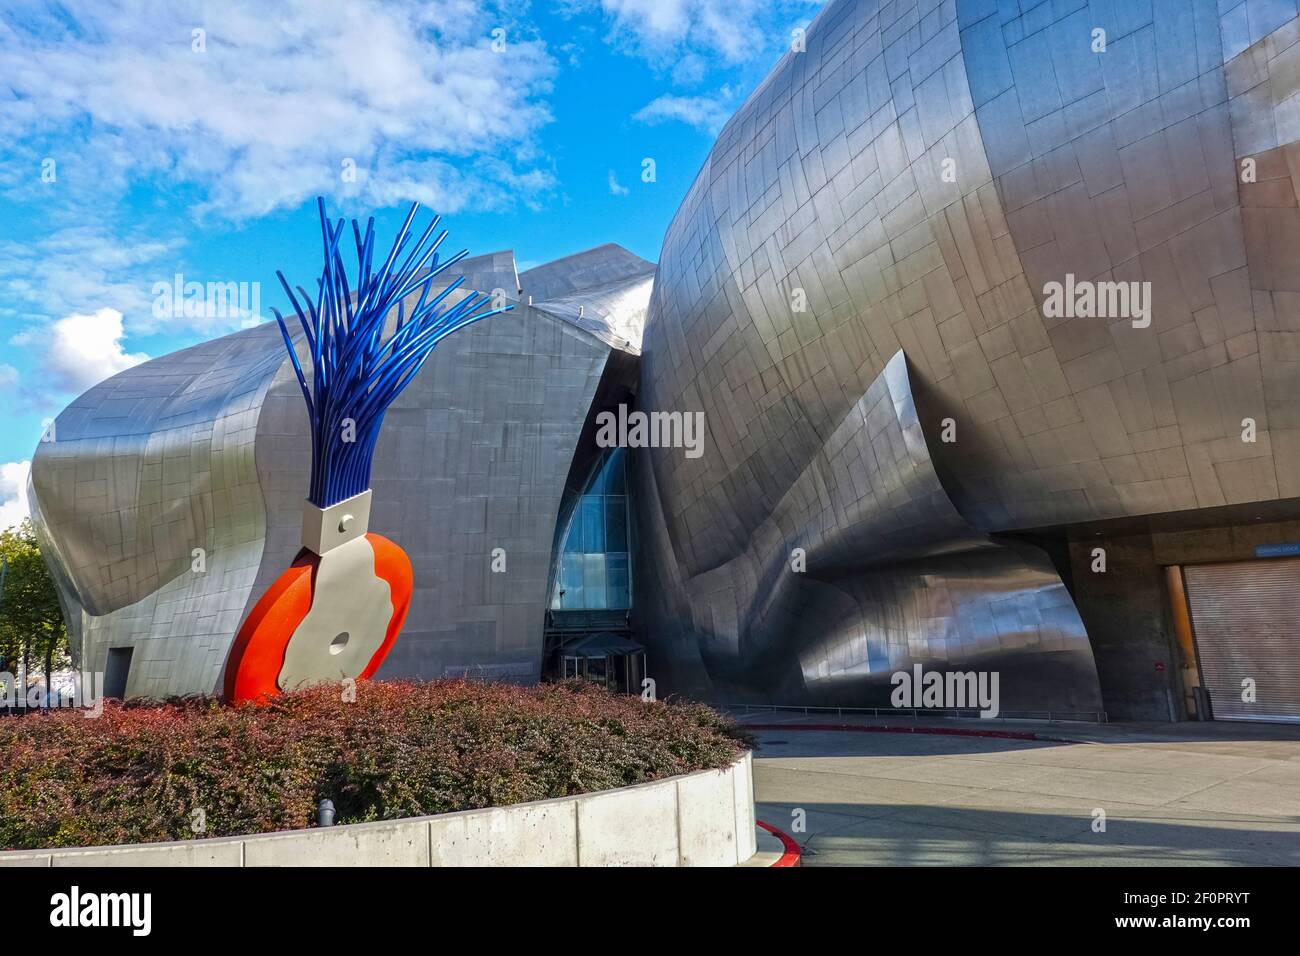 Seattle, Washington, USA, October 19, 2019: Sculpture Typewriter Eraser by Claes Oldenburg, work of contemporary art at the Museum of Pop Culture Stock Photo